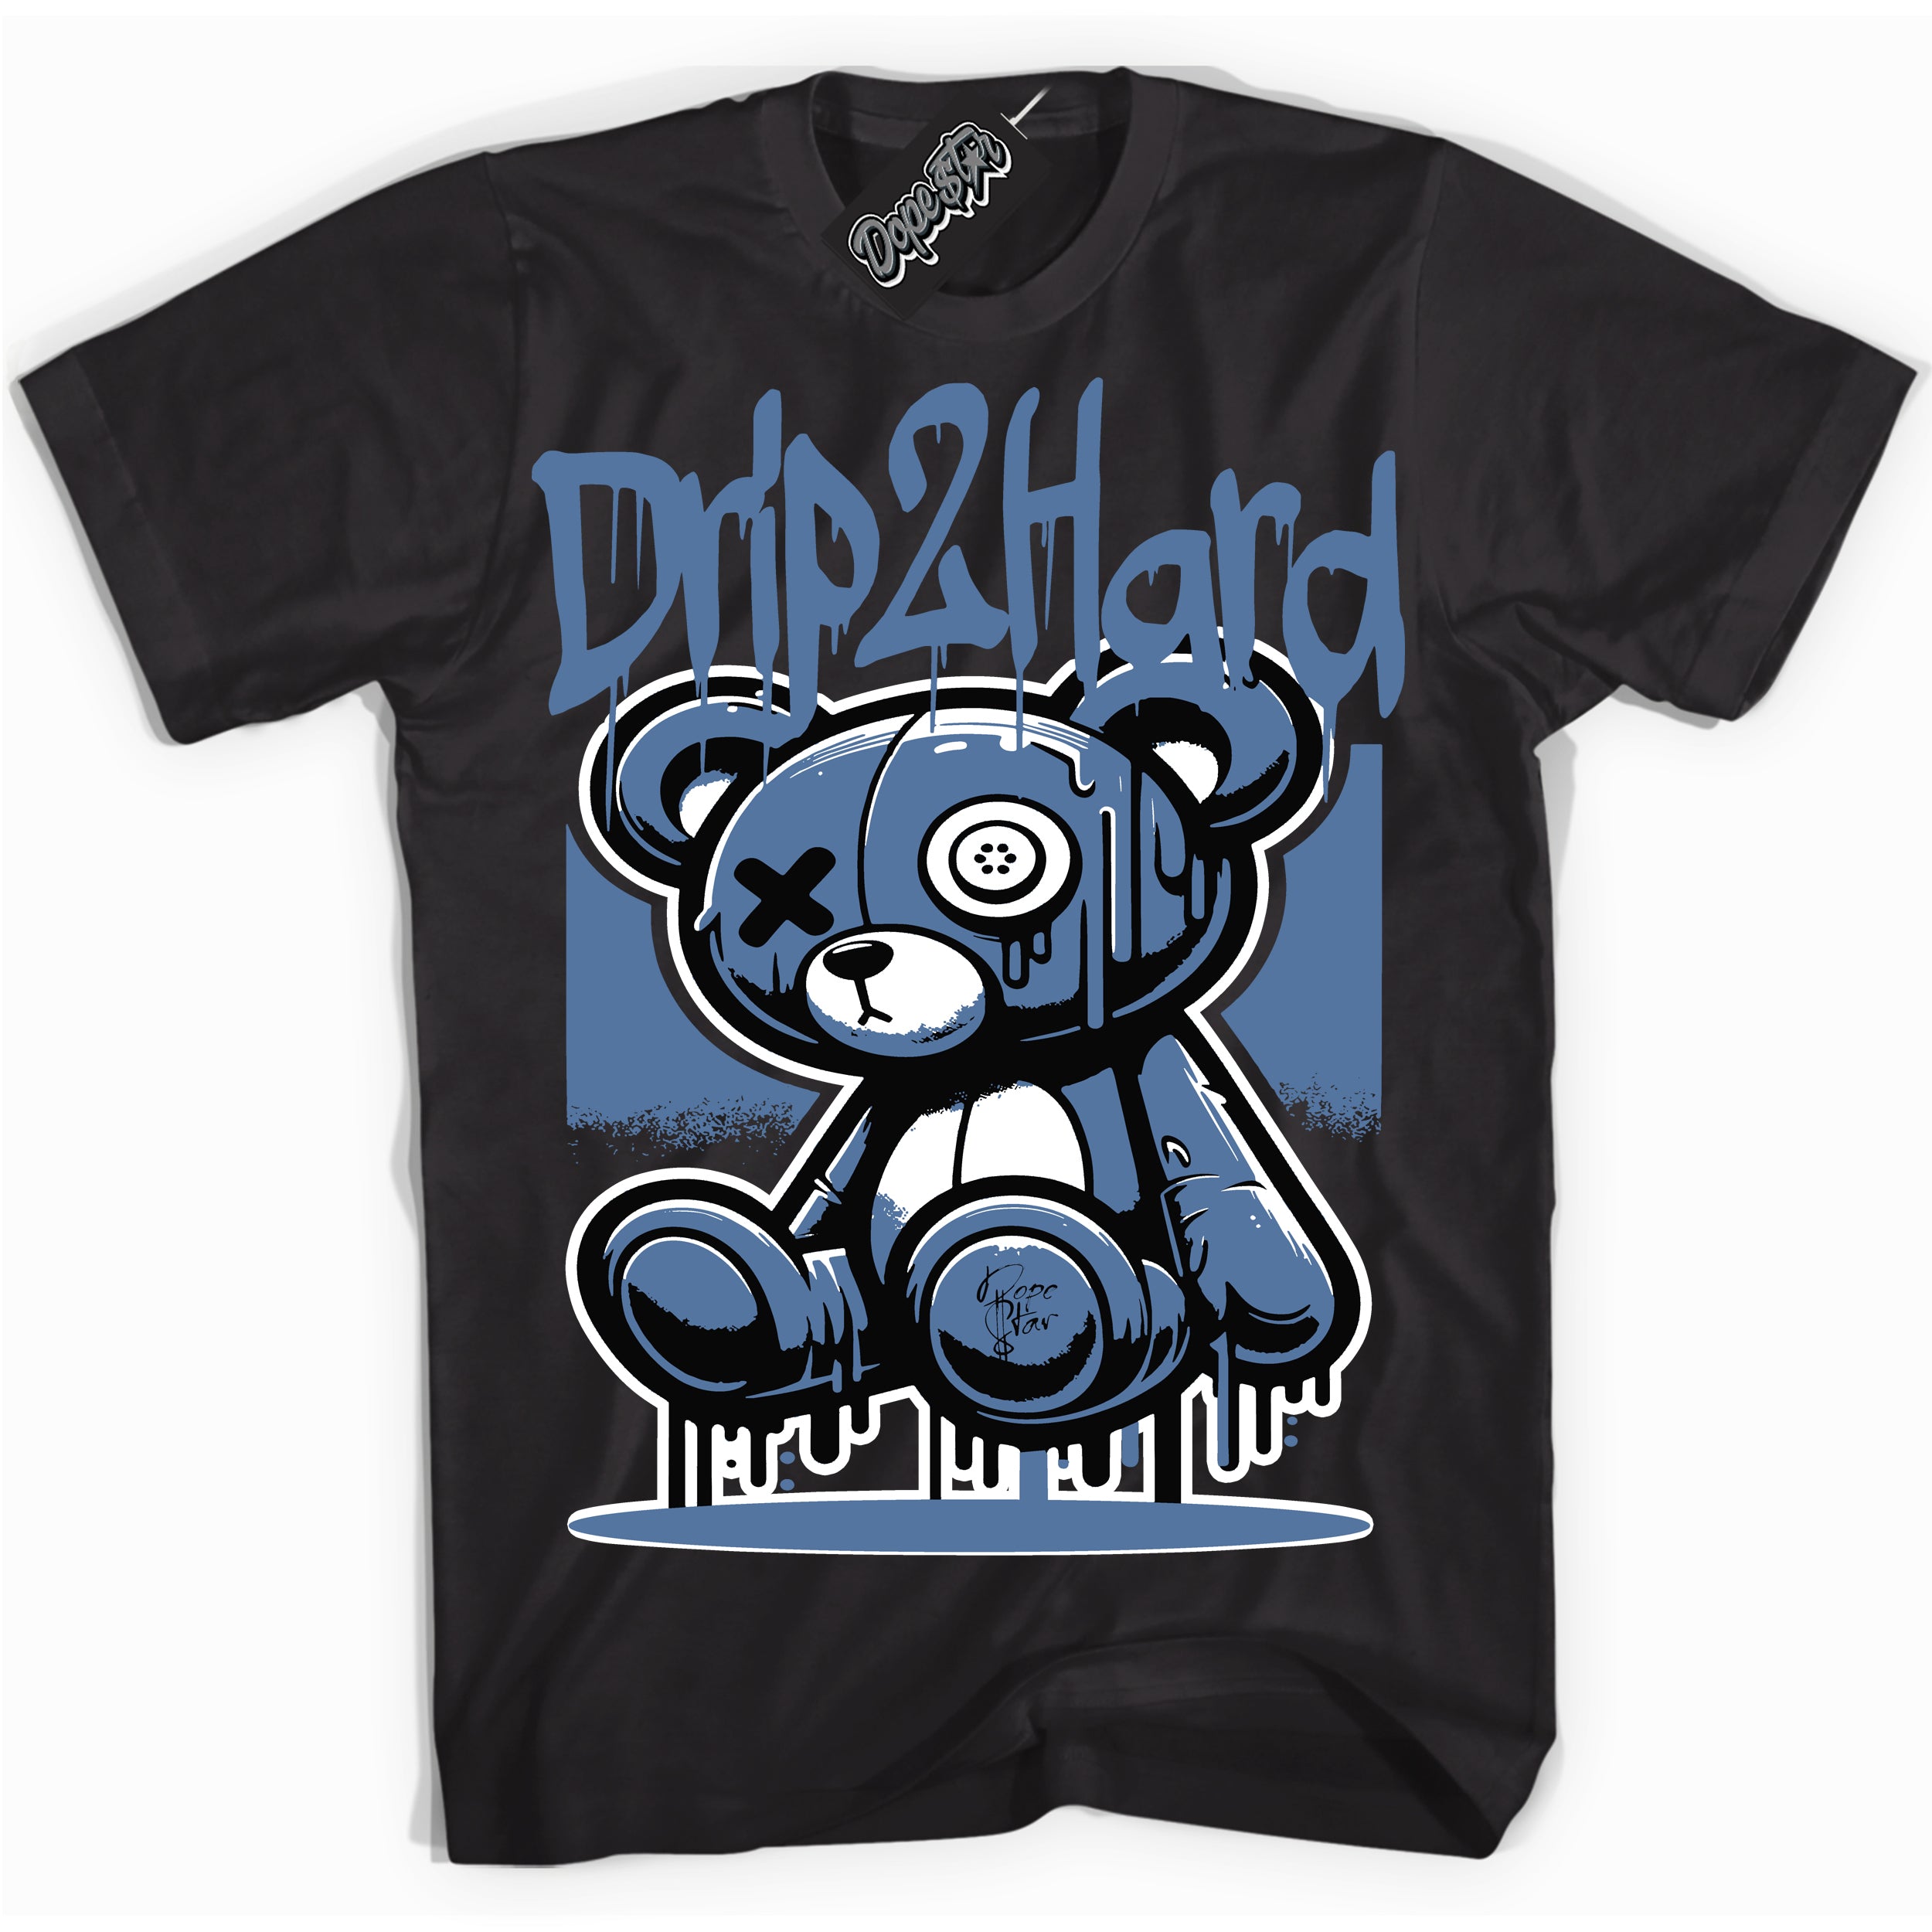 Cool Black graphic tee with “ Drip 2 Hard ” design, that perfectly matches Mystic Navy 1s